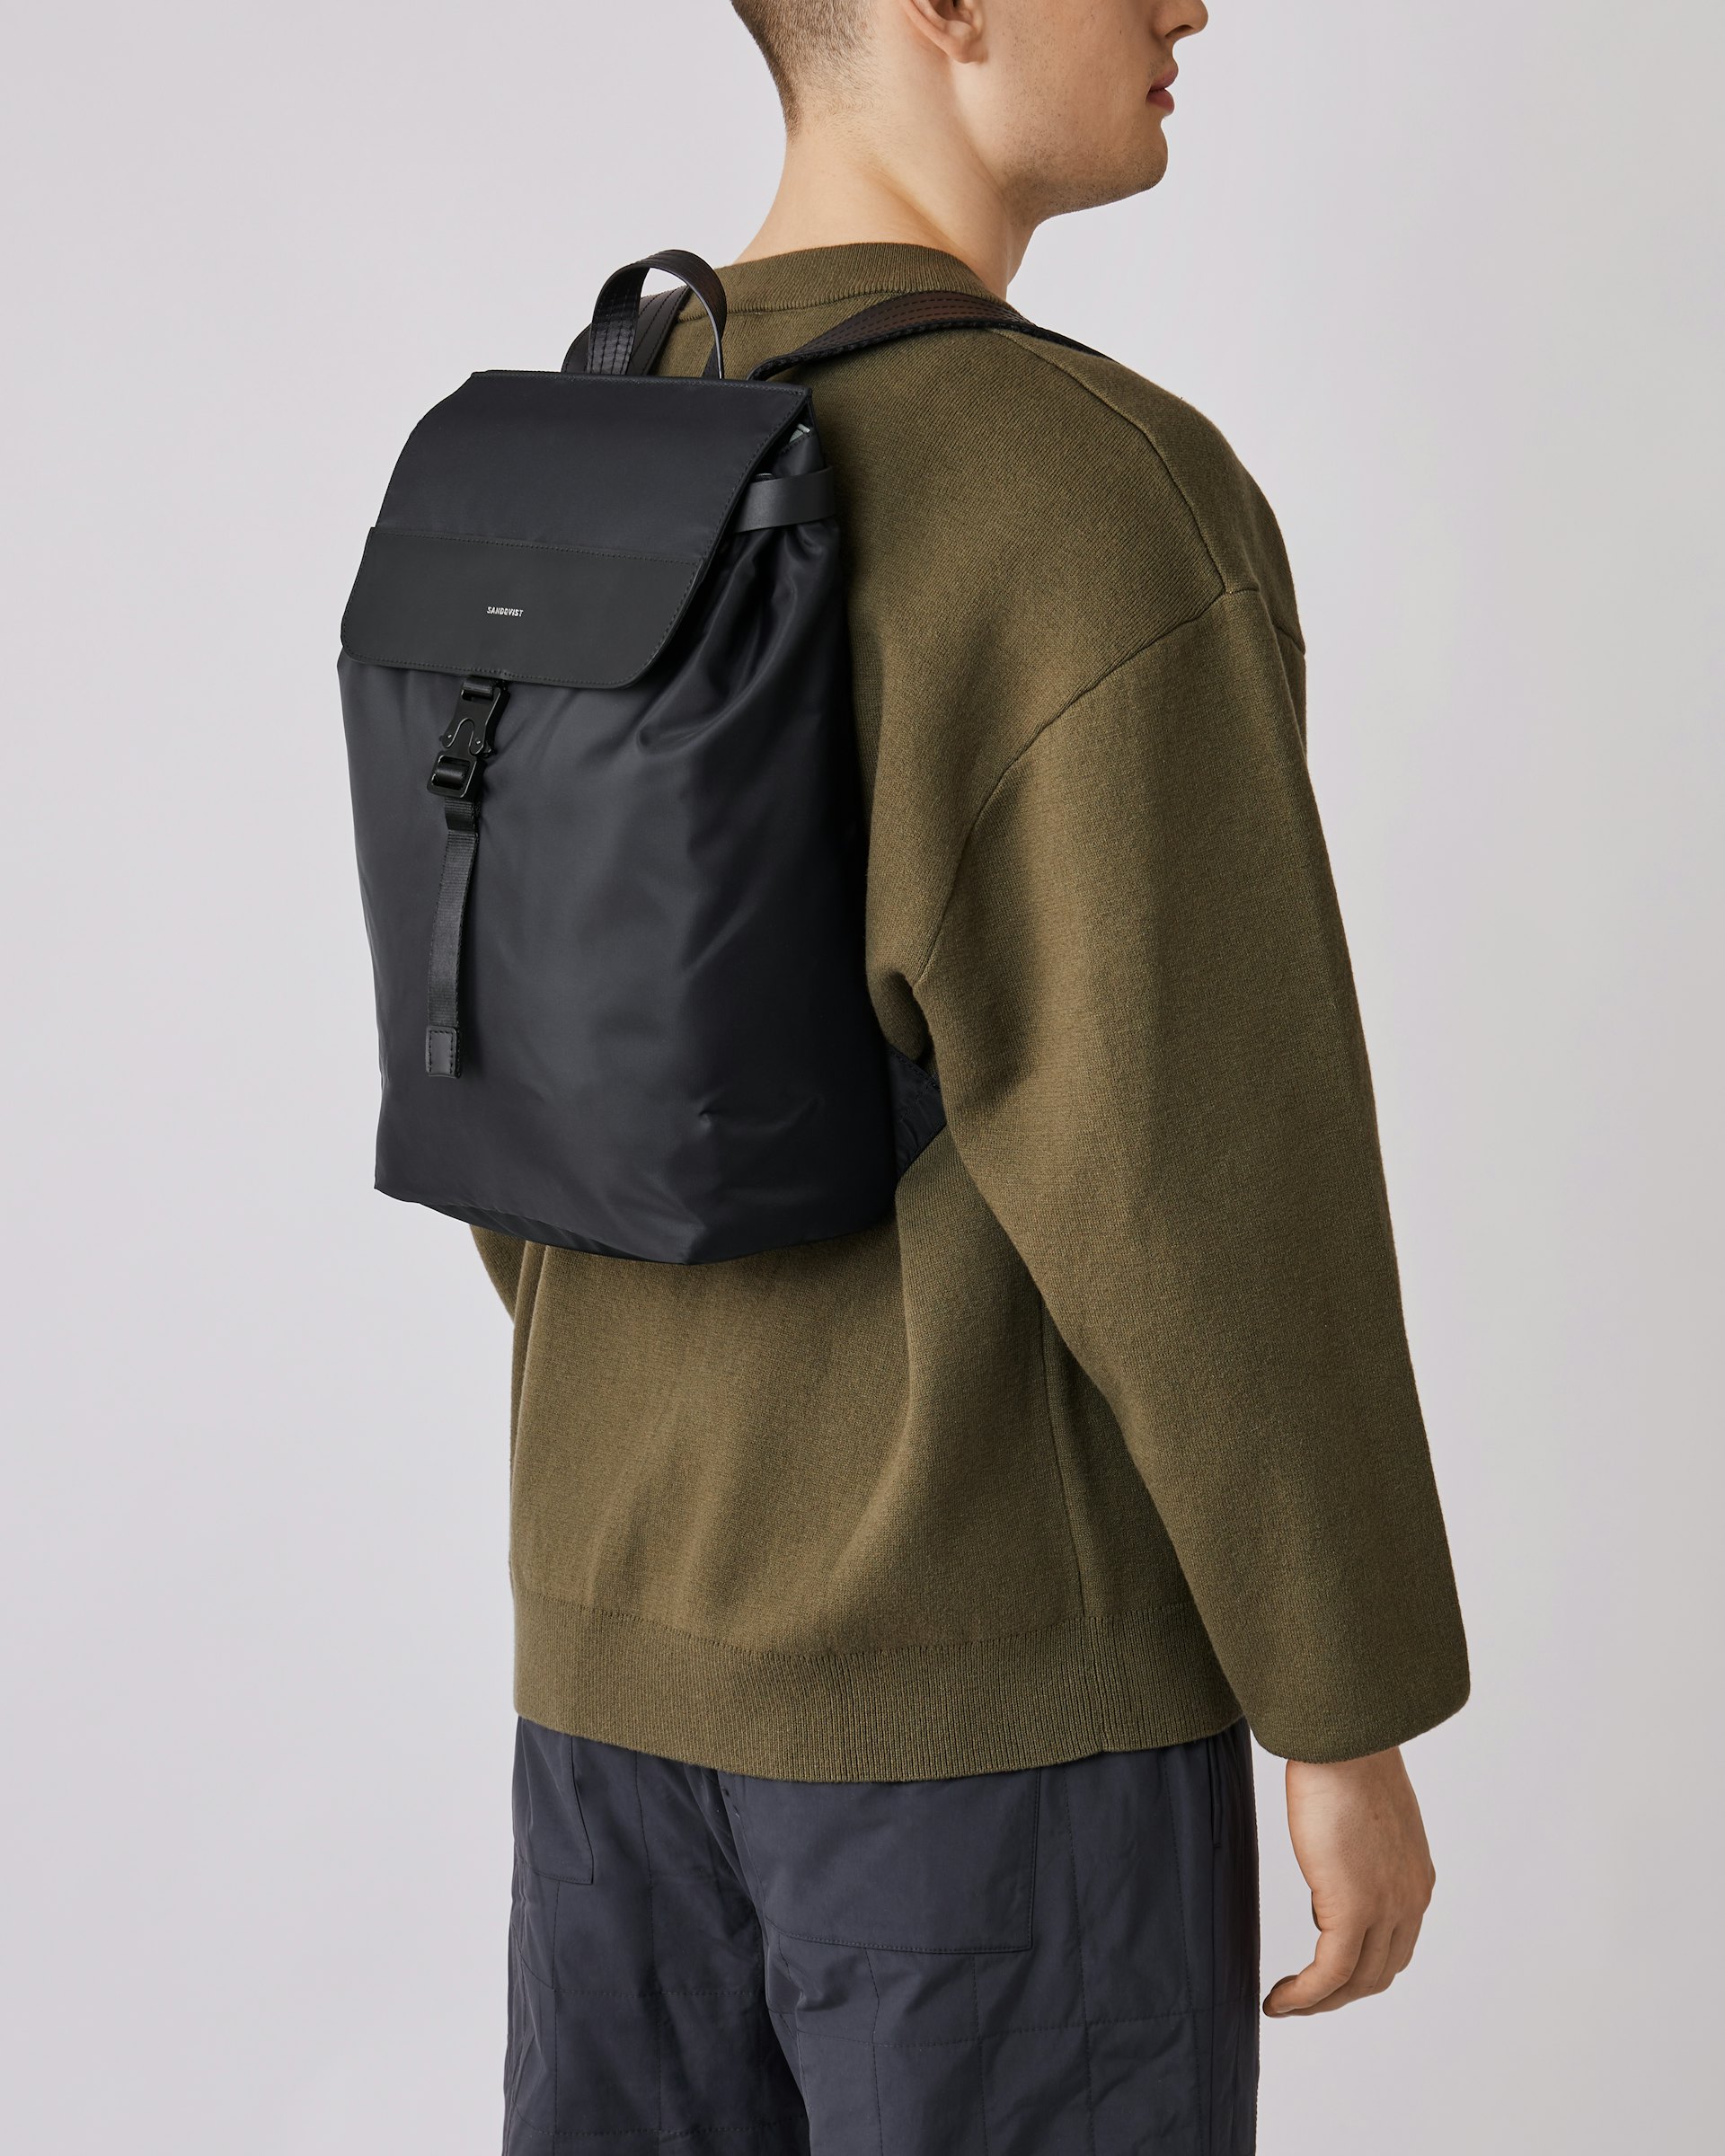 Alva Nylon belongs to the category Backpacks and is in color black (7 of 7)